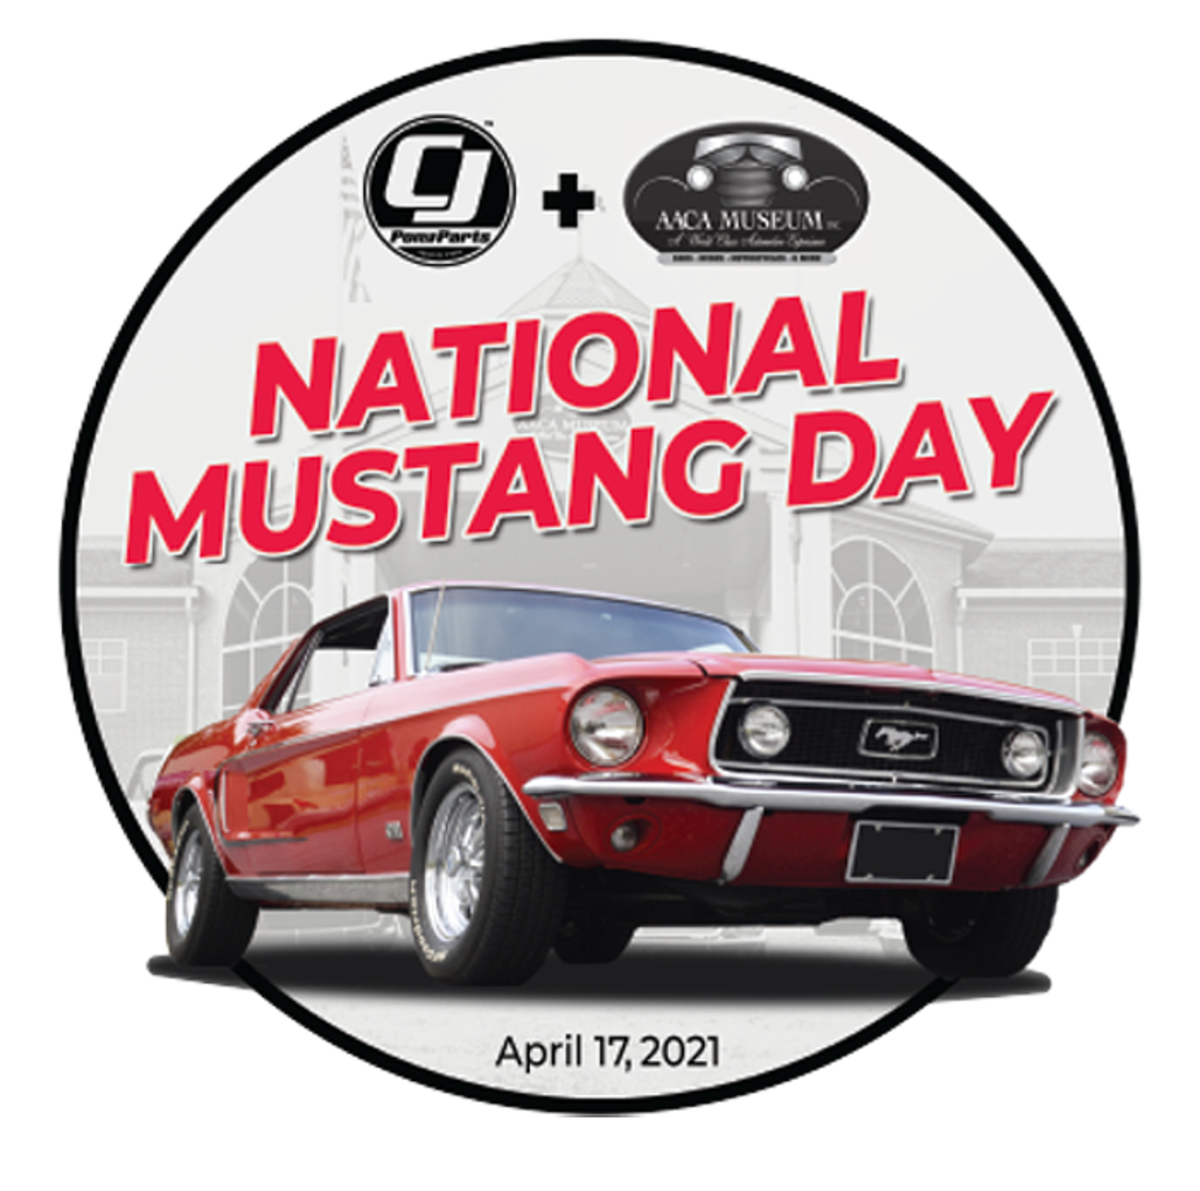 National Mustang Day at AACA Museum